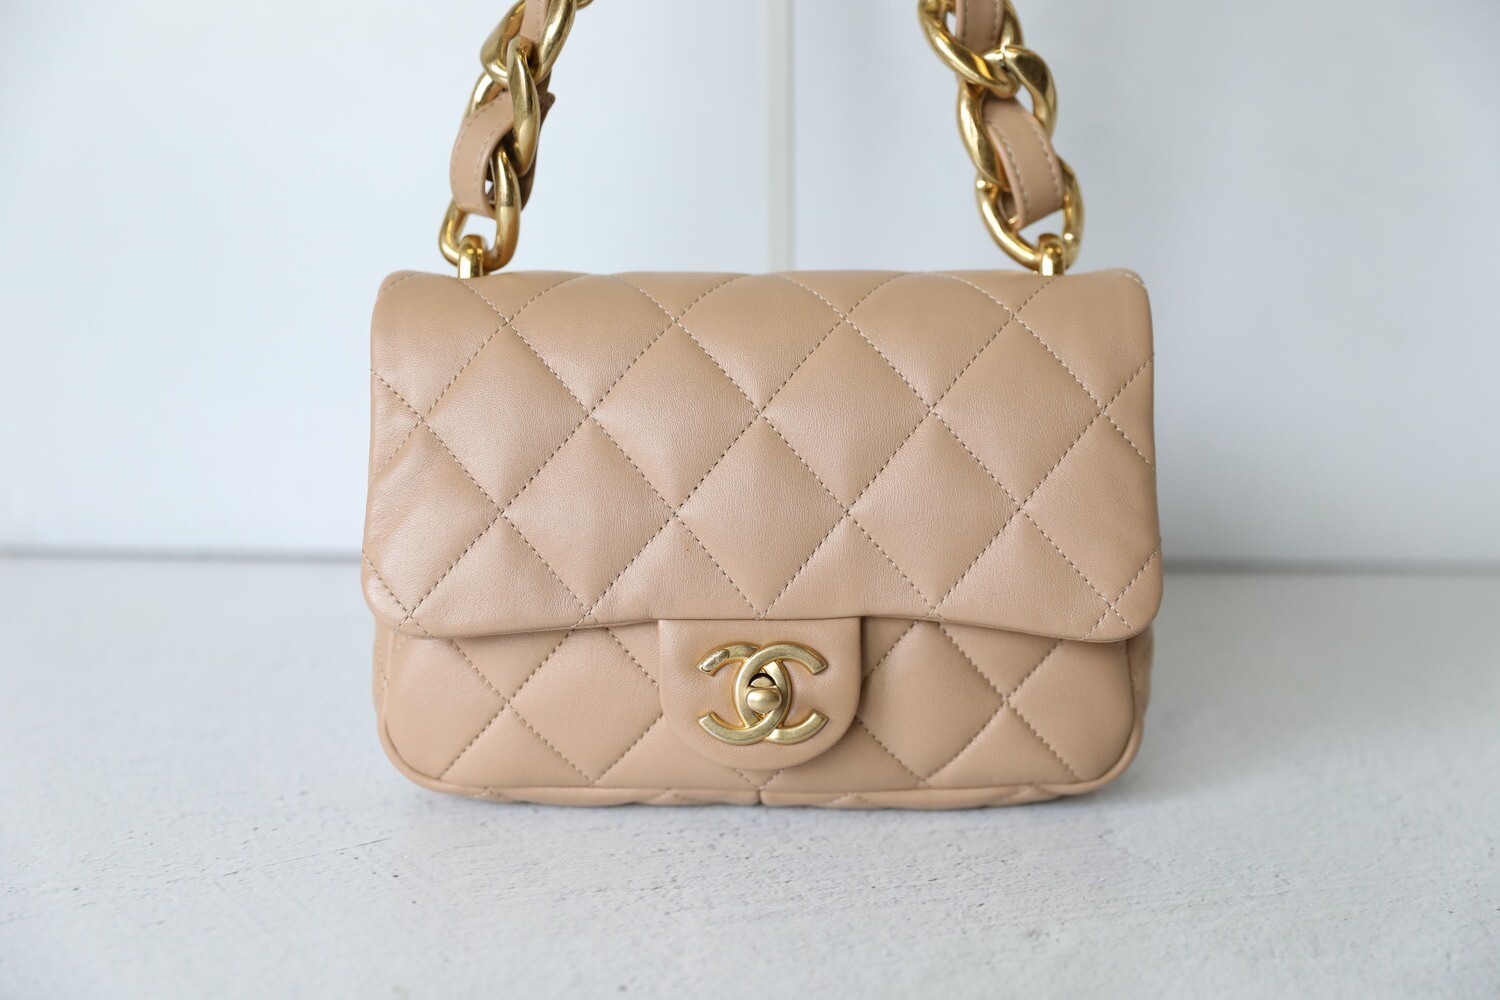 Chanel Funky Town Small, Dark Beige, Preowned No Dustbag WA001